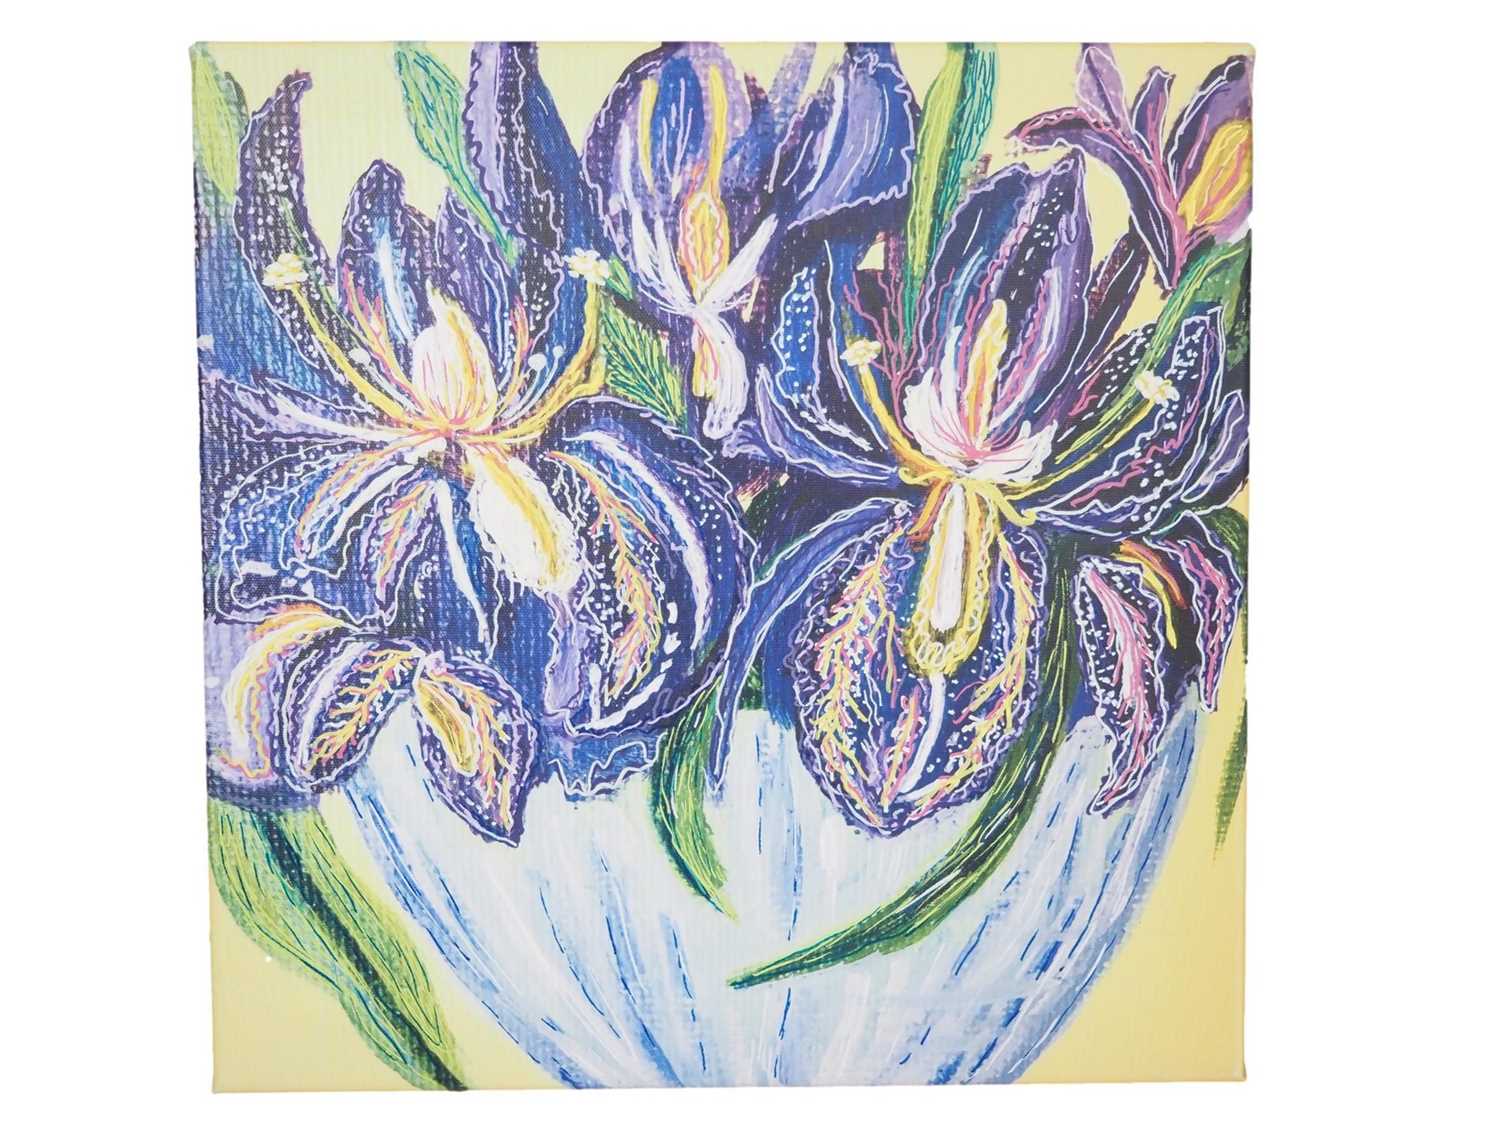 Lisa Cooper 'VASE OF IRISES' - print on canvas - 15.75" x 15.75" - PROVENANCE: Donated to and sold